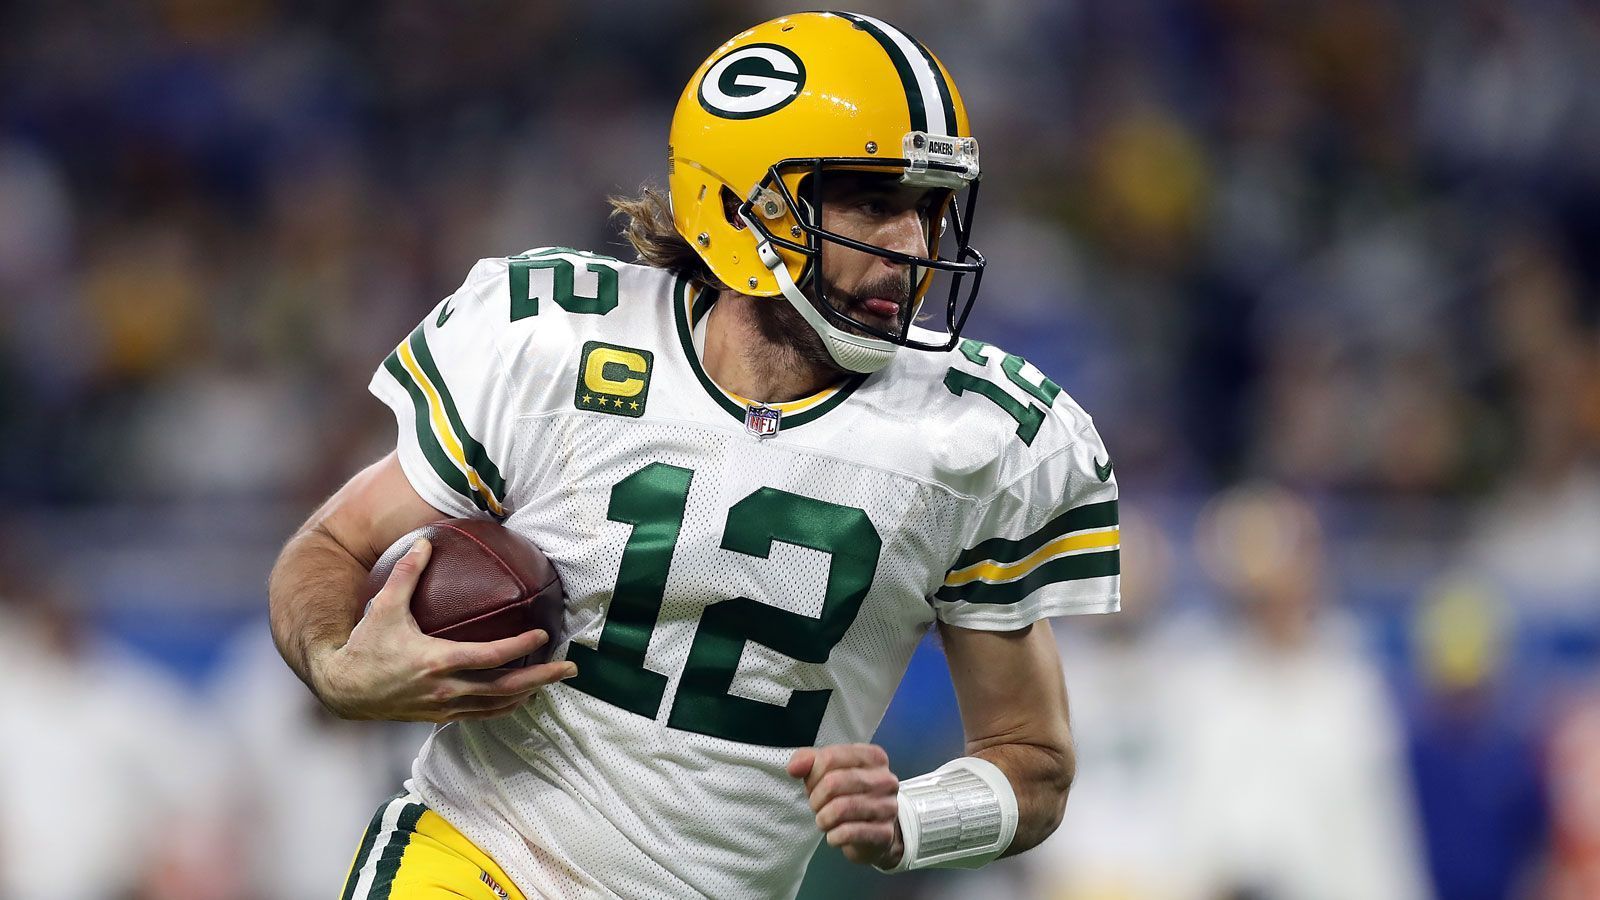 
                <strong>Platz 6: Aaron Rodgers (Green Bay Packers)</strong><br>
                &#x2022; Position: Quarterback<br>&#x2022; In der NFL seit: 2005 (24. Pick)<br>&#x2022; Größte Erfolge: Super-Bowl-Champion XLV, 4x NFL Season MVP, Super Bowl MVP, NFL 2010s All-Decade Team, 4x First-Team All-Pro, 10x Pro Bowl<br>
              